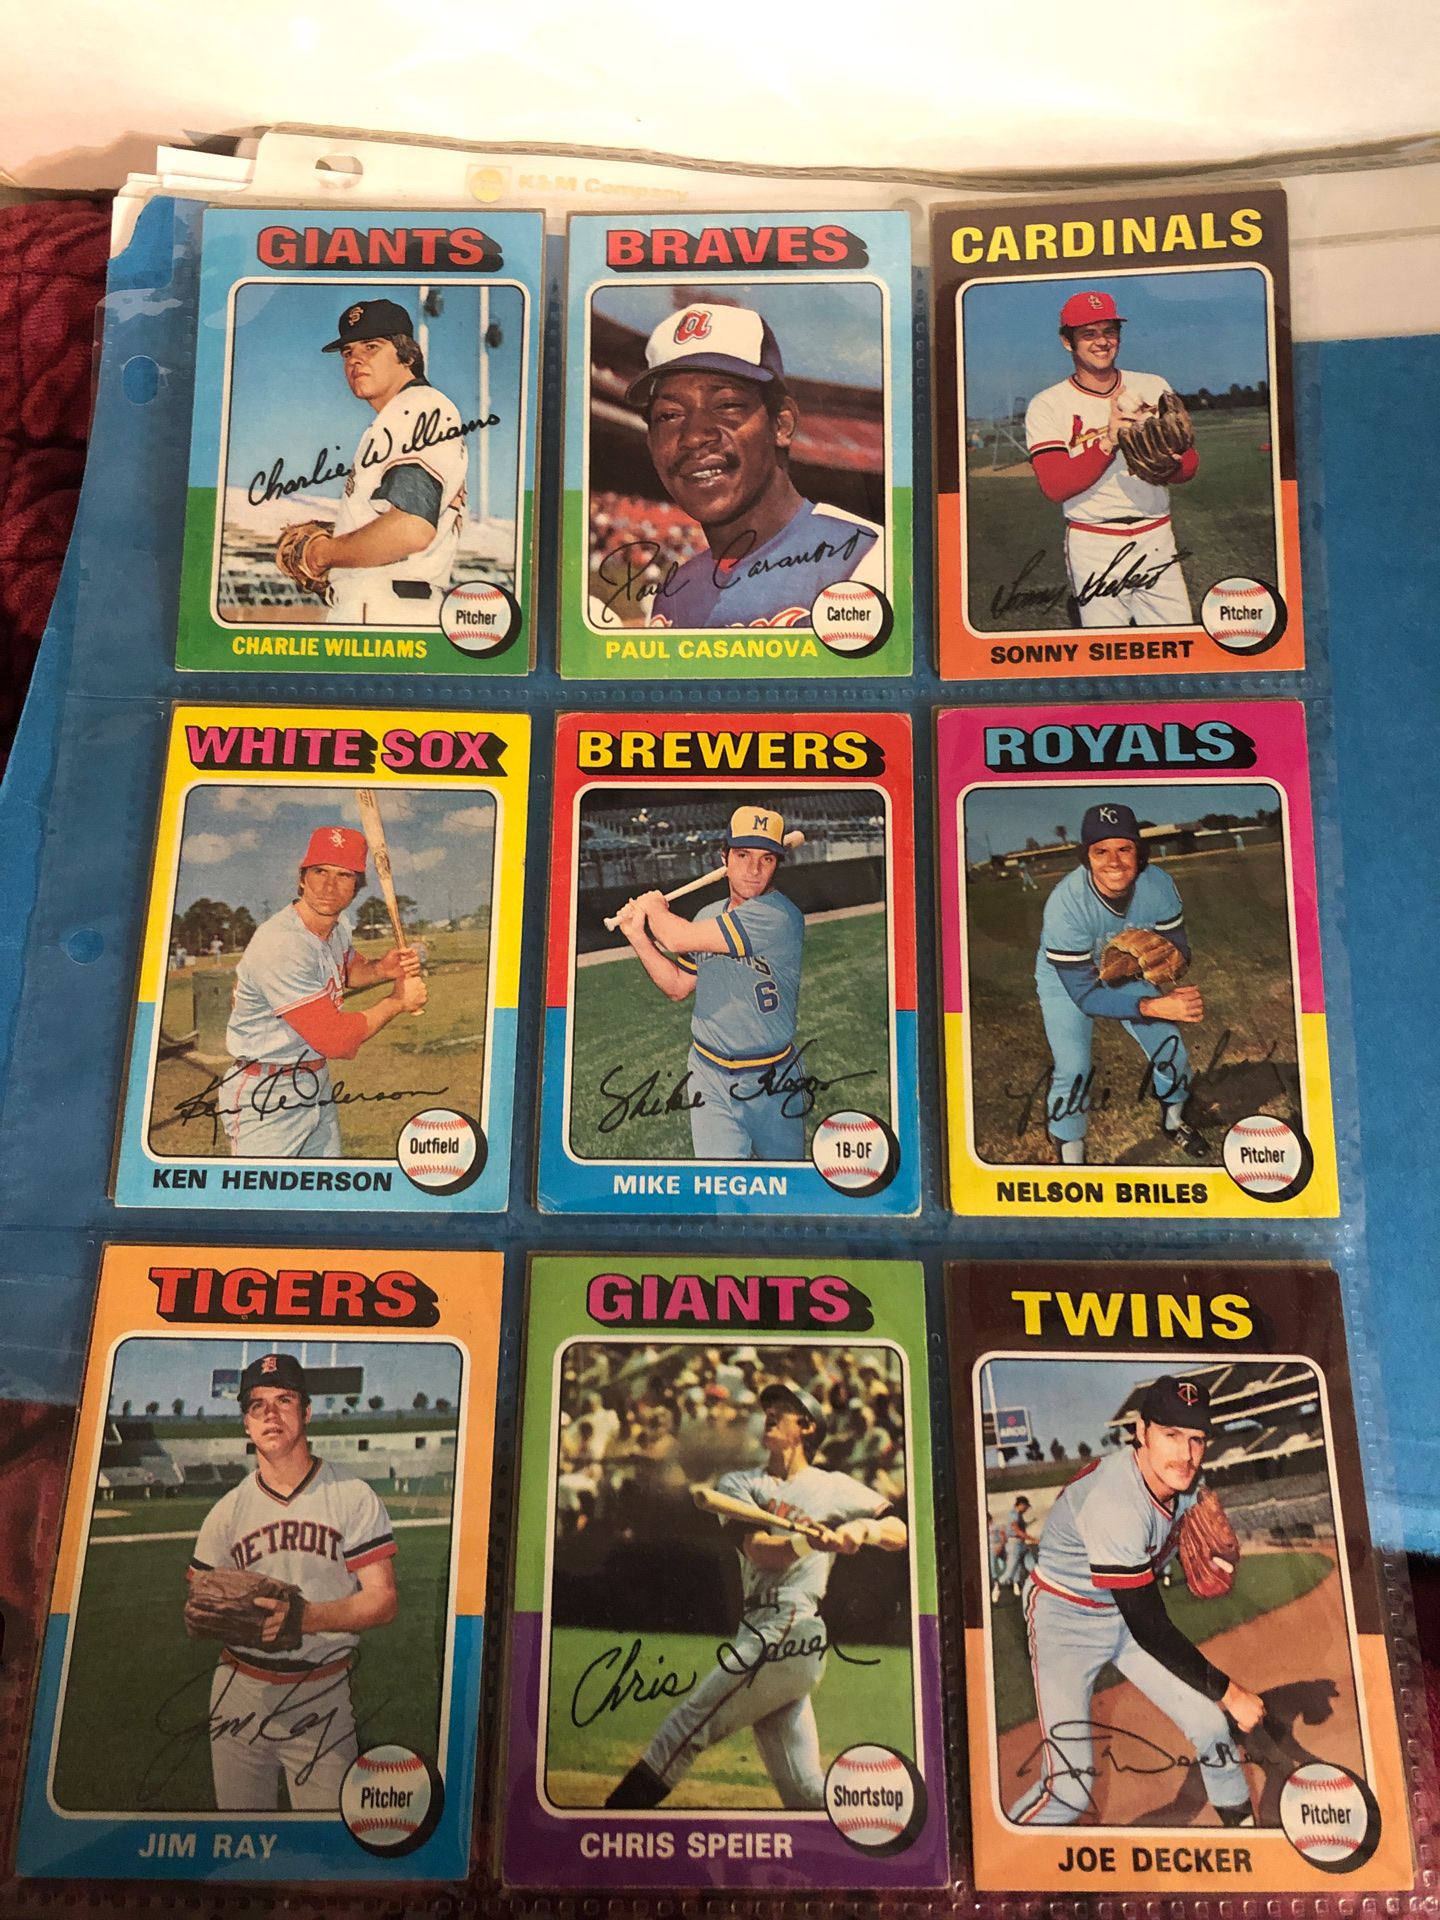 Beautiful 1975 topps baseball card lot #3of 18 cards all for only $4